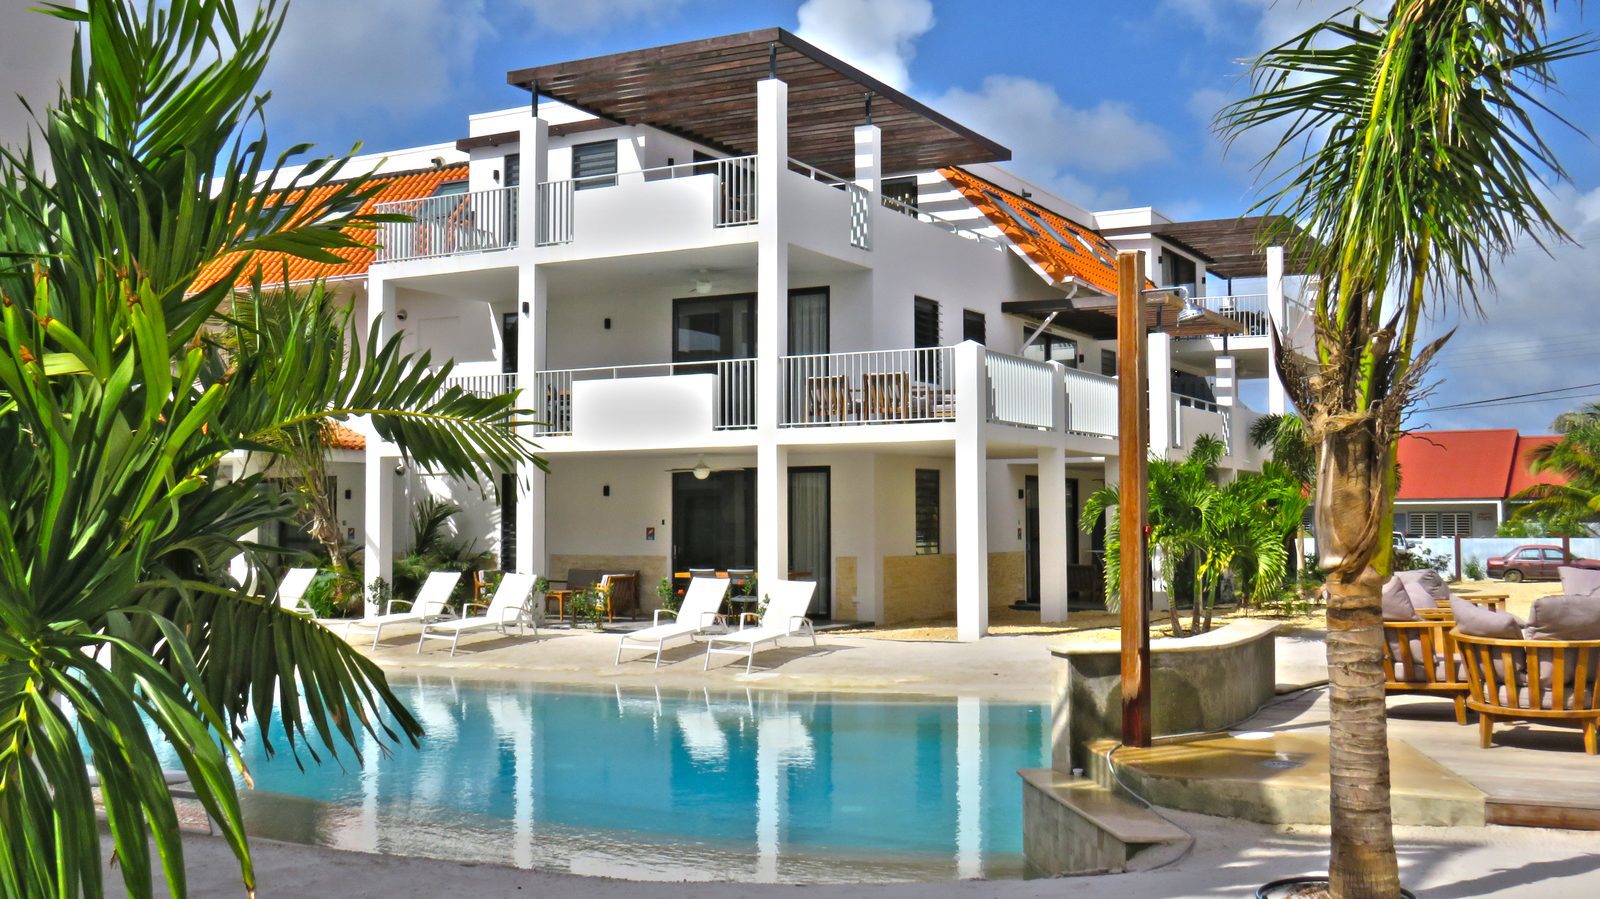 Staying on Bonaire? That is possible at Resort Bonaire! We have several apartments that are luxurious and have everything you need.